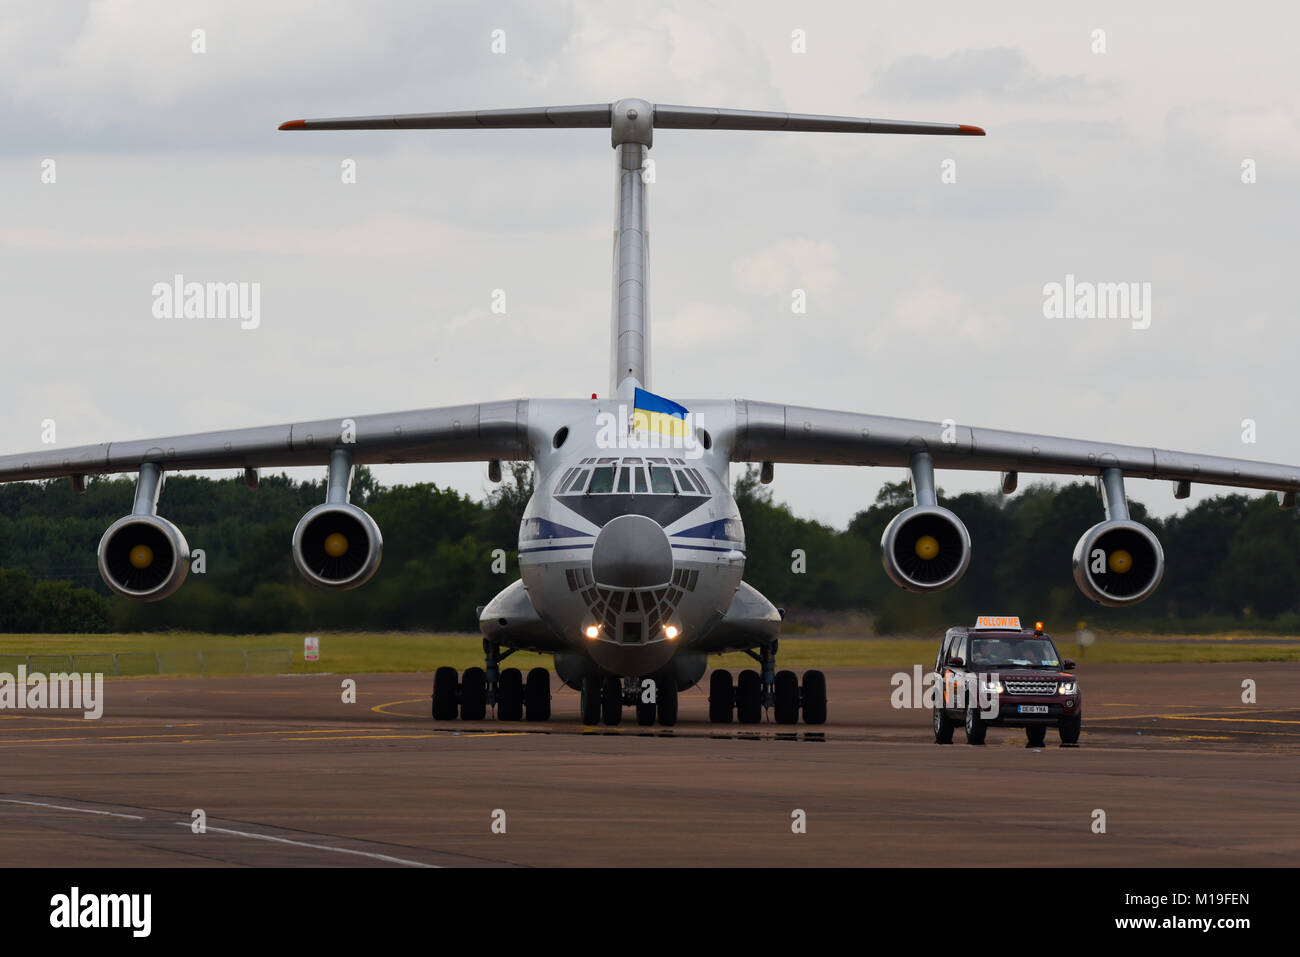 Ilyushin Il-76 Candid of the Ukrainian Air Force at the RAF Fairford Royal International Air Tattoo, UK. Following a Follow Me car on taxiway Stock Photo